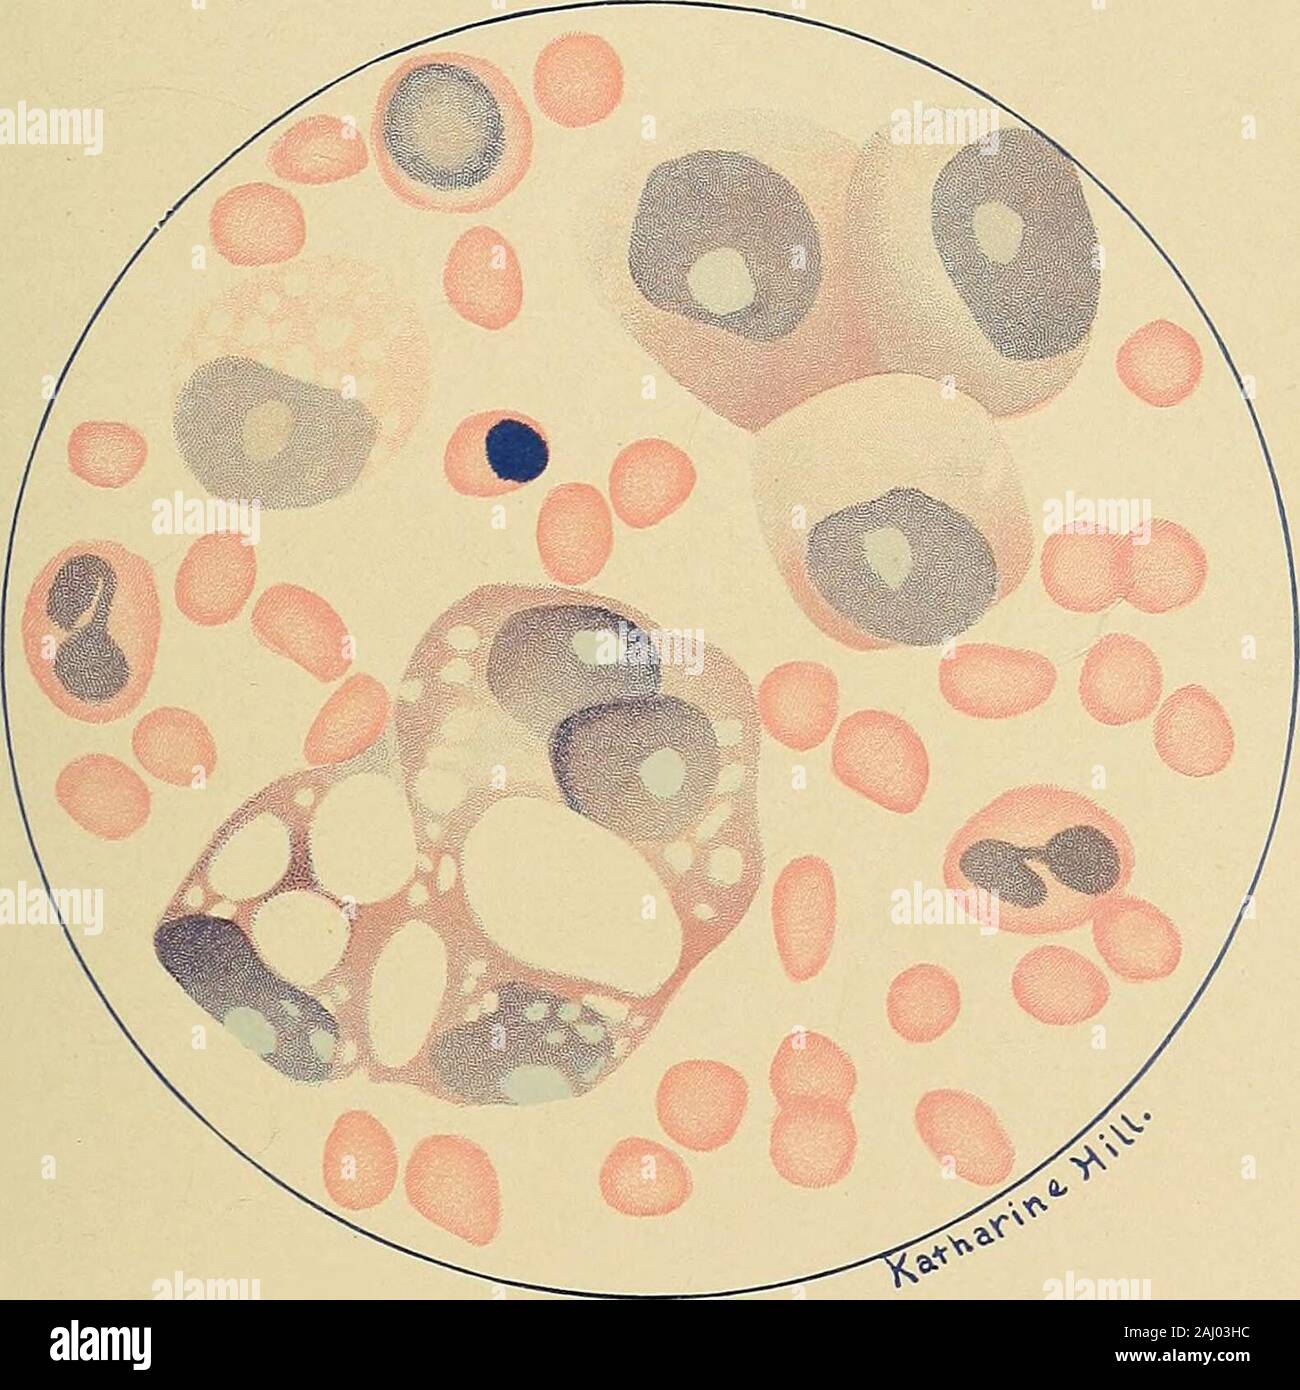 Diagnostic methods, chemical, bacteriological and microscopical : a text-book for students and practitioners . e complicatedthe condition than when it is due to a pure congestion. Numerous red cellsare especially observed in association with a congestive pleurisy. Peritoneal Exudates. The cytological examination of peritoneal exudates has, as yet, yieldedfewer diagnostic points than has that of pleural exudates. It is, however,sometimes possible to differentiate a tubercular peritonitis from an ascites oran ovarian cyst by means of such examinations. Tubercular peritonitisusually shows a lymph Stock Photo